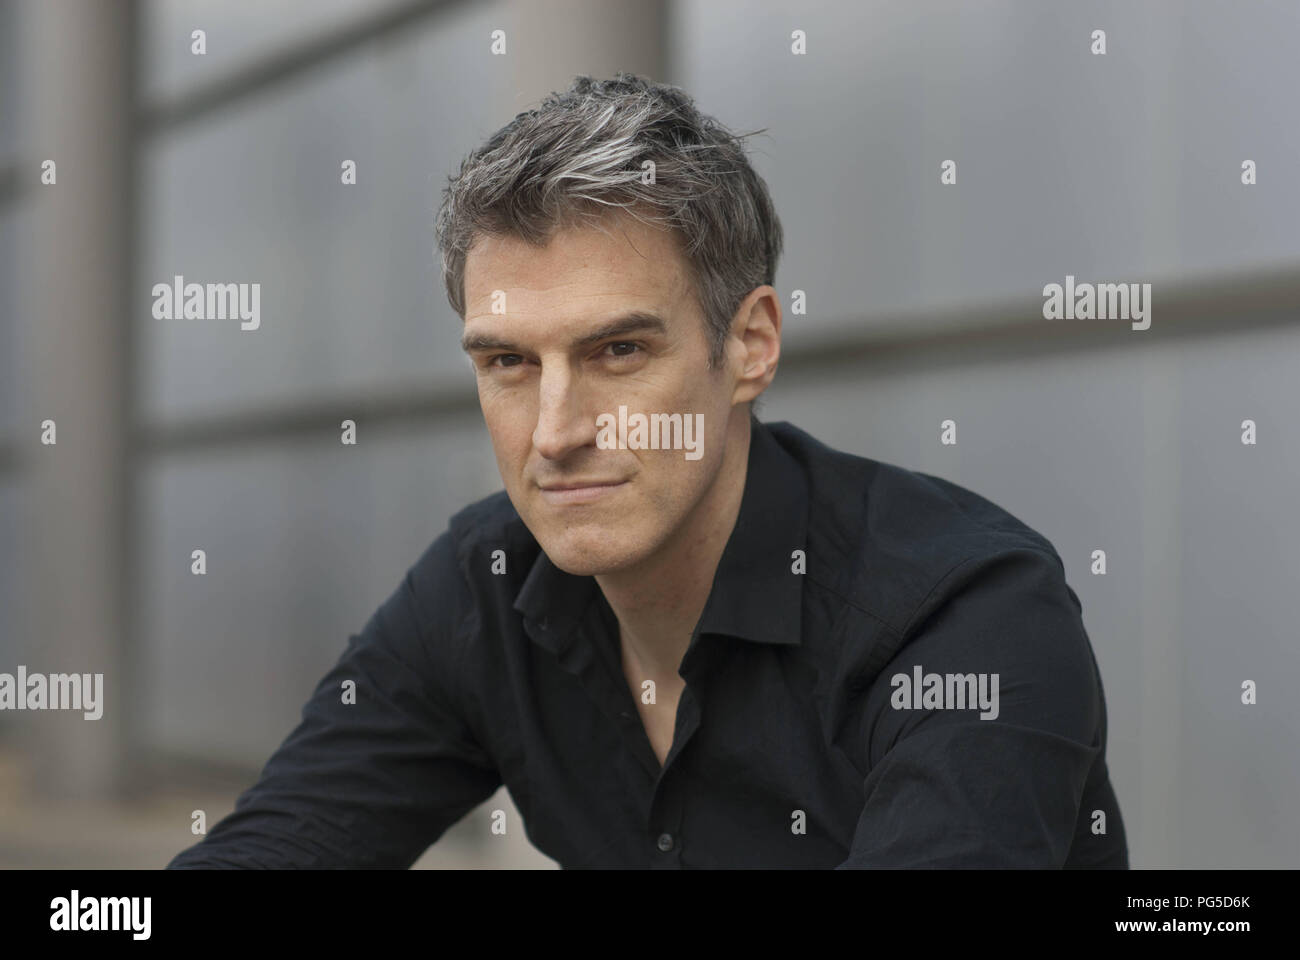 Leipzig, DEU, 13.03.2015: Portrait Thomas Raab (Austria), thriller author and writer. Born 1970, he lives after completion of math and sports studies as a writer, composer and musician with his family in Vienna. Stock Photo